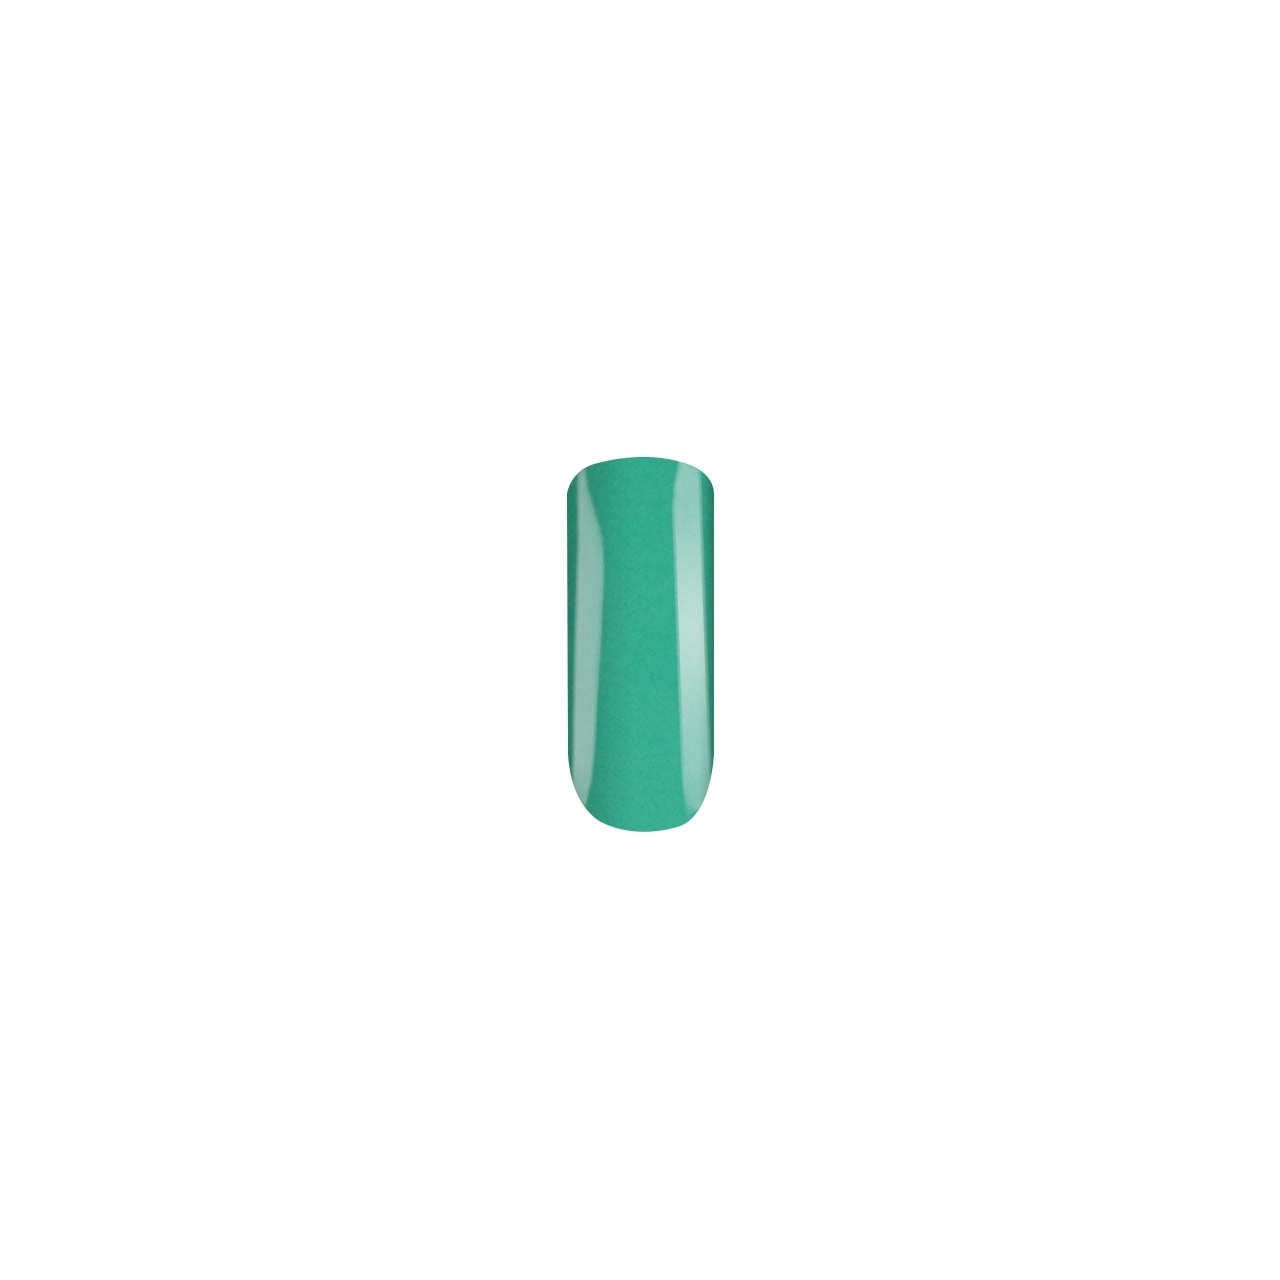 BAEHR BEAUTY CONCEPT - NAILS Nagellack mint soft pastell 11 ml